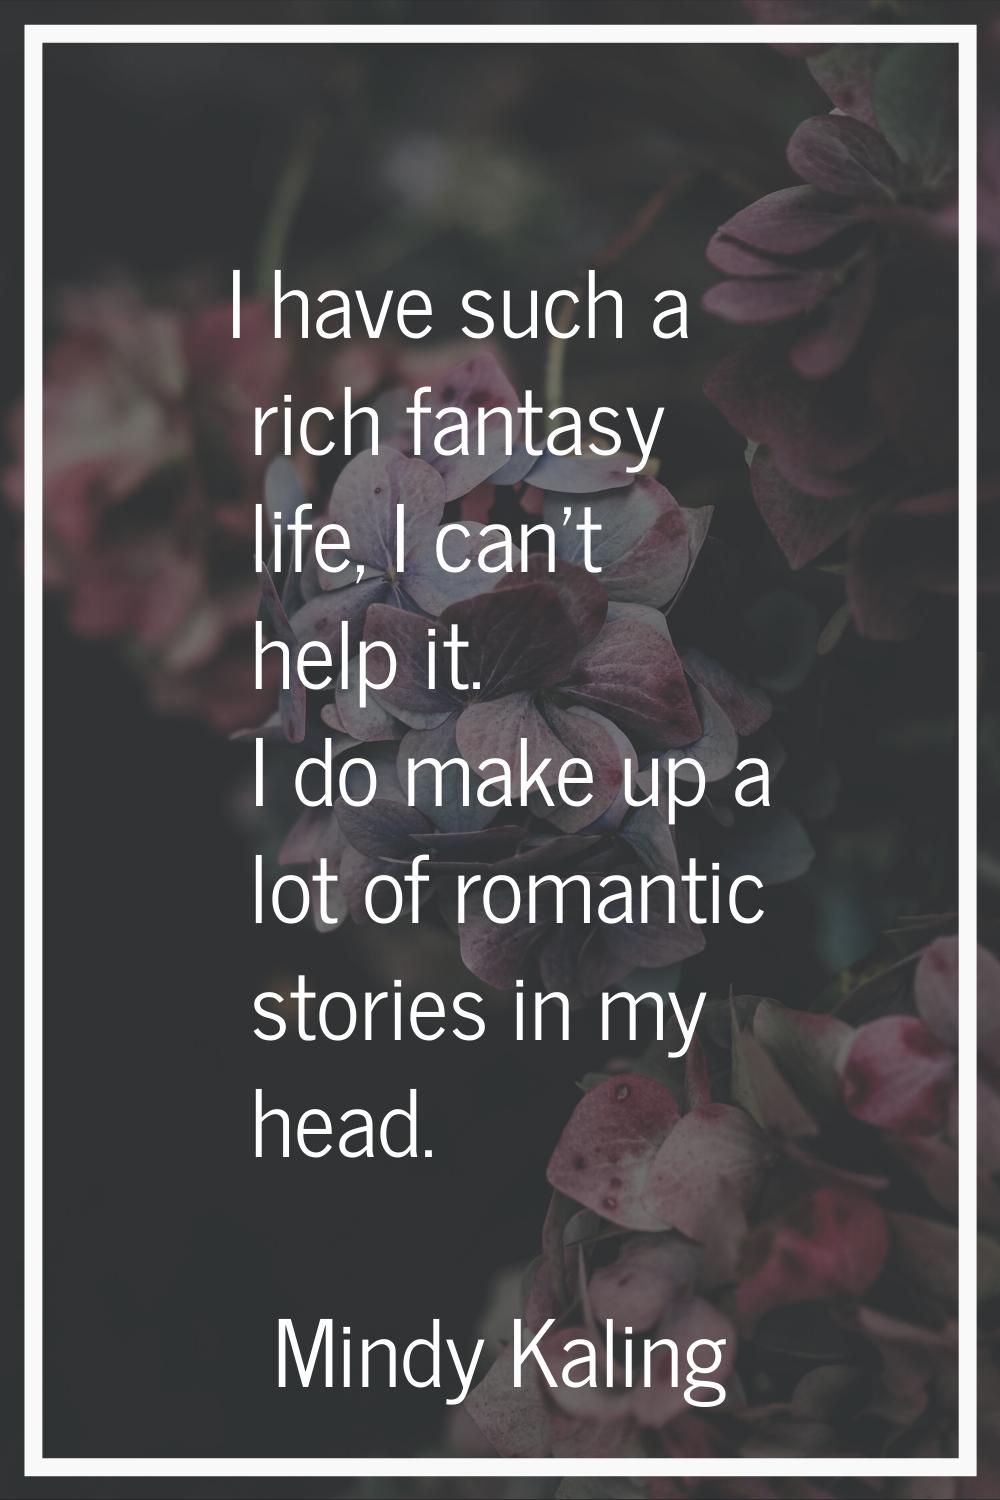 I have such a rich fantasy life, I can't help it. I do make up a lot of romantic stories in my head